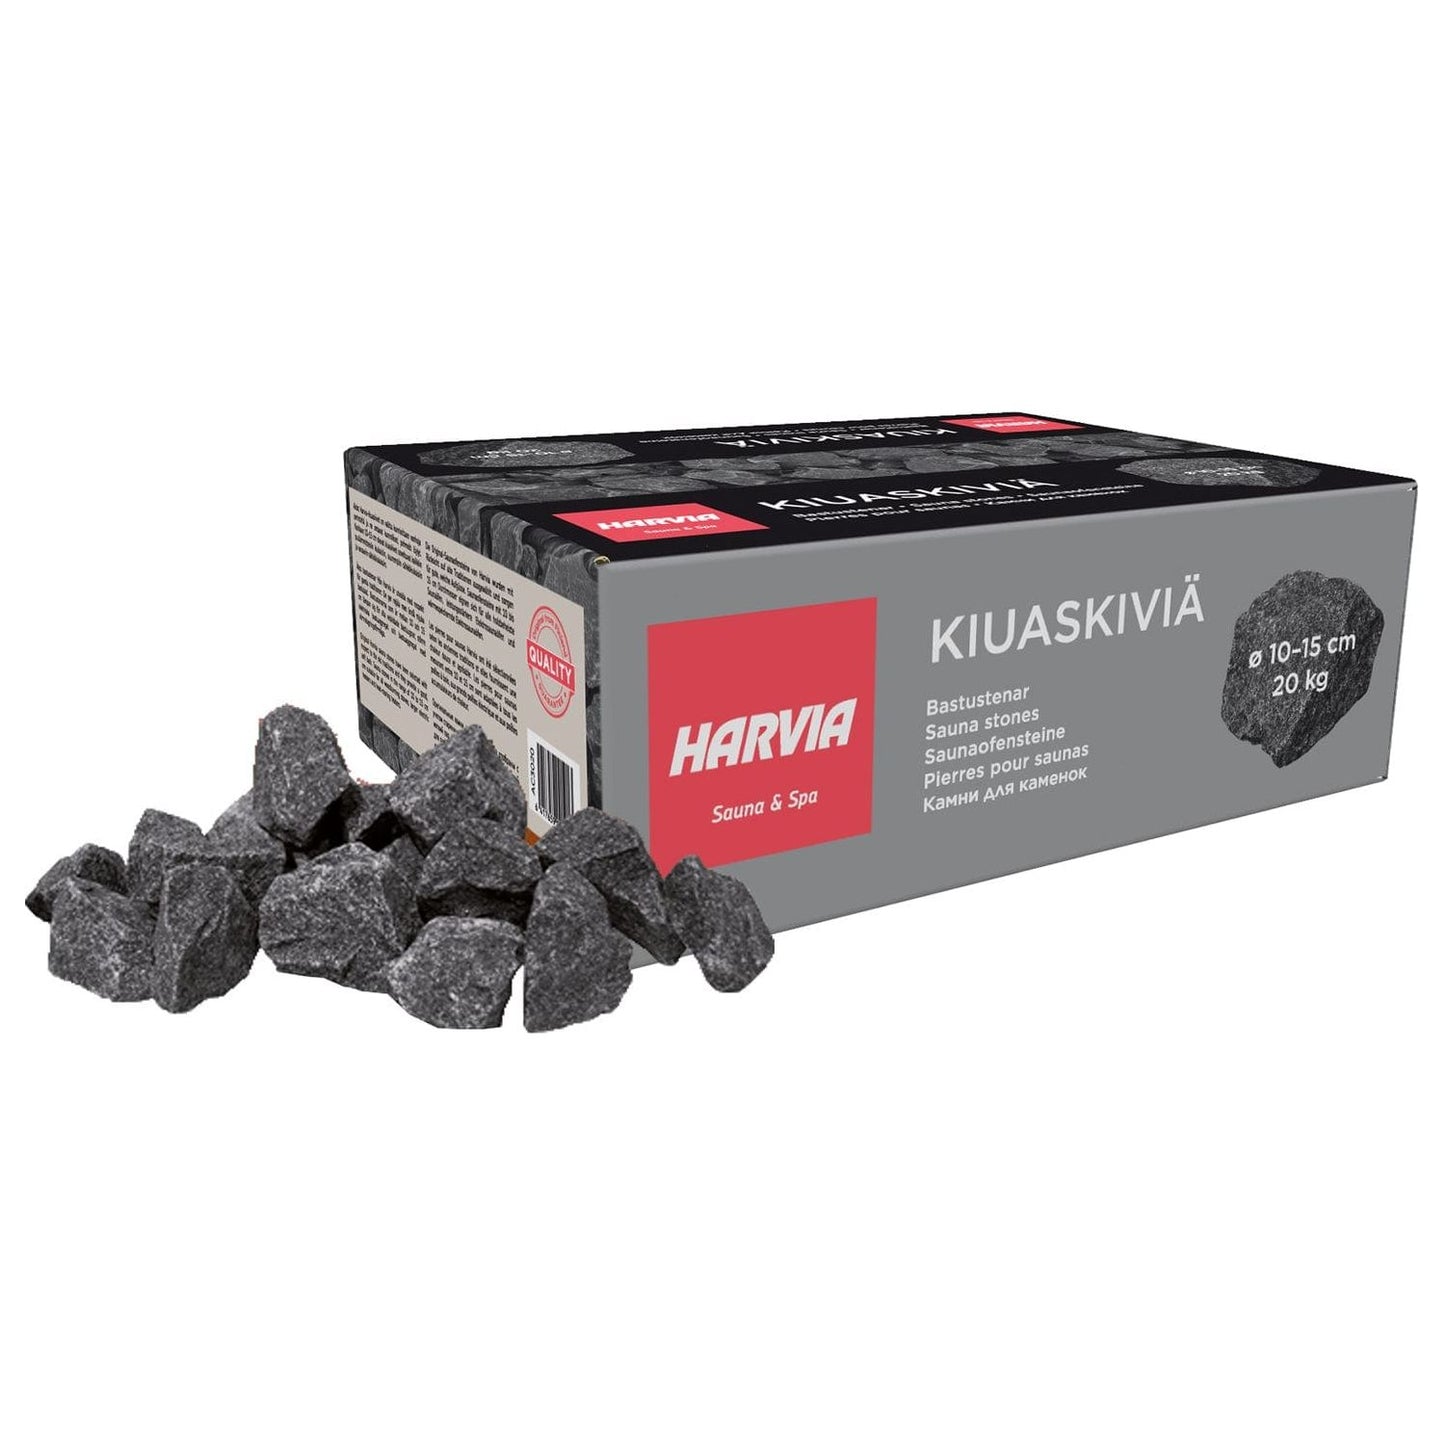 Sauna Wellness Shop Harvia, 2 boxes of 5-10/ 0-10cm stones *Not Sold Separately